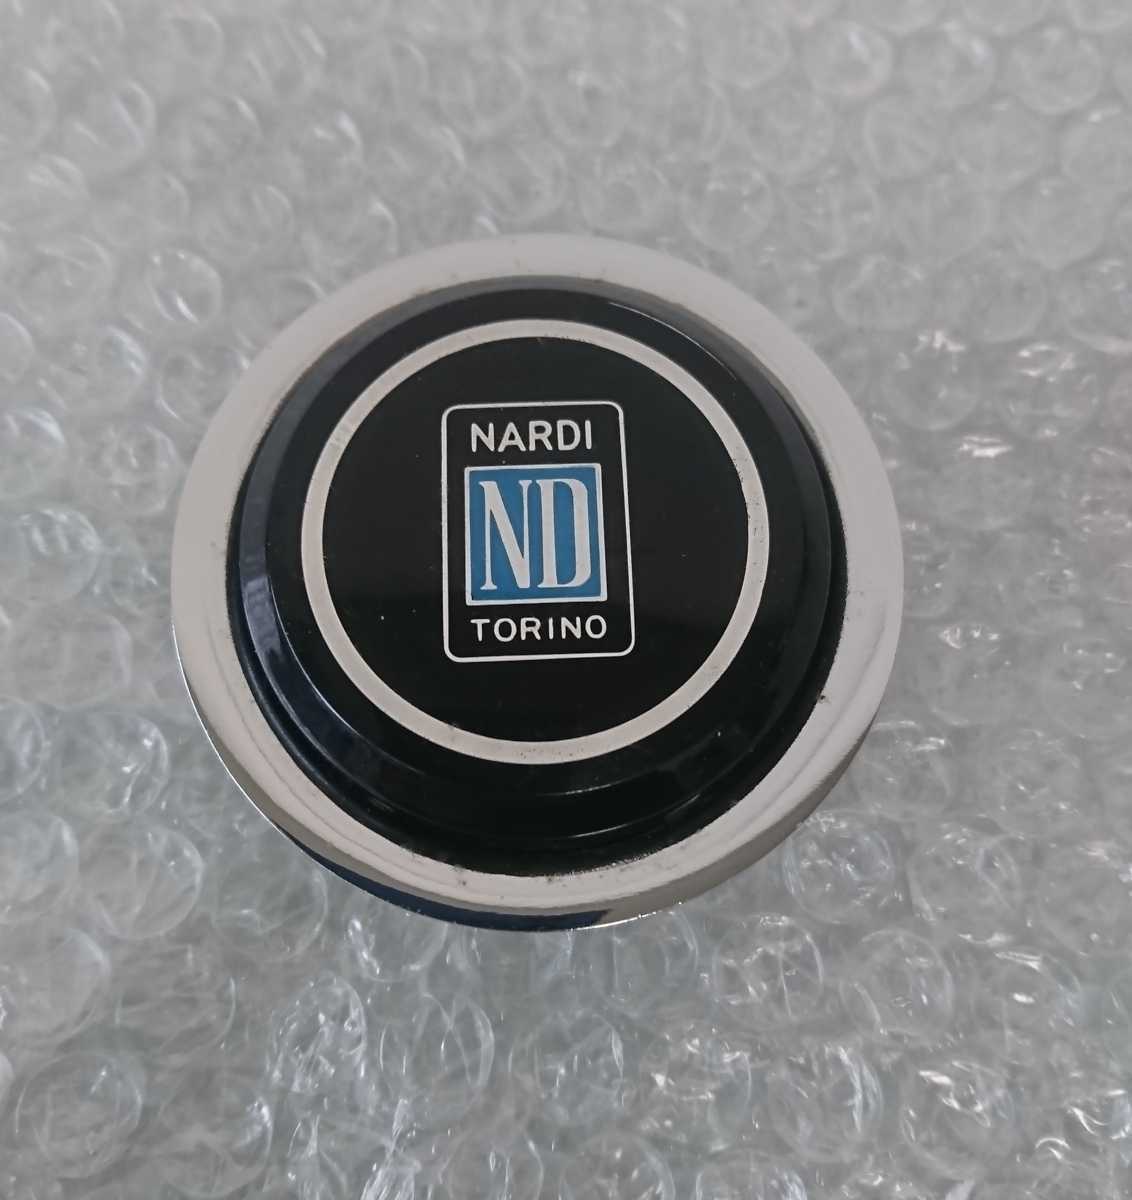 NARDI TORINO Nardi trumpet Mark less steering gear for horn button at that time thing all-purpose goods Claxon steering wheel that time thing Vintage 